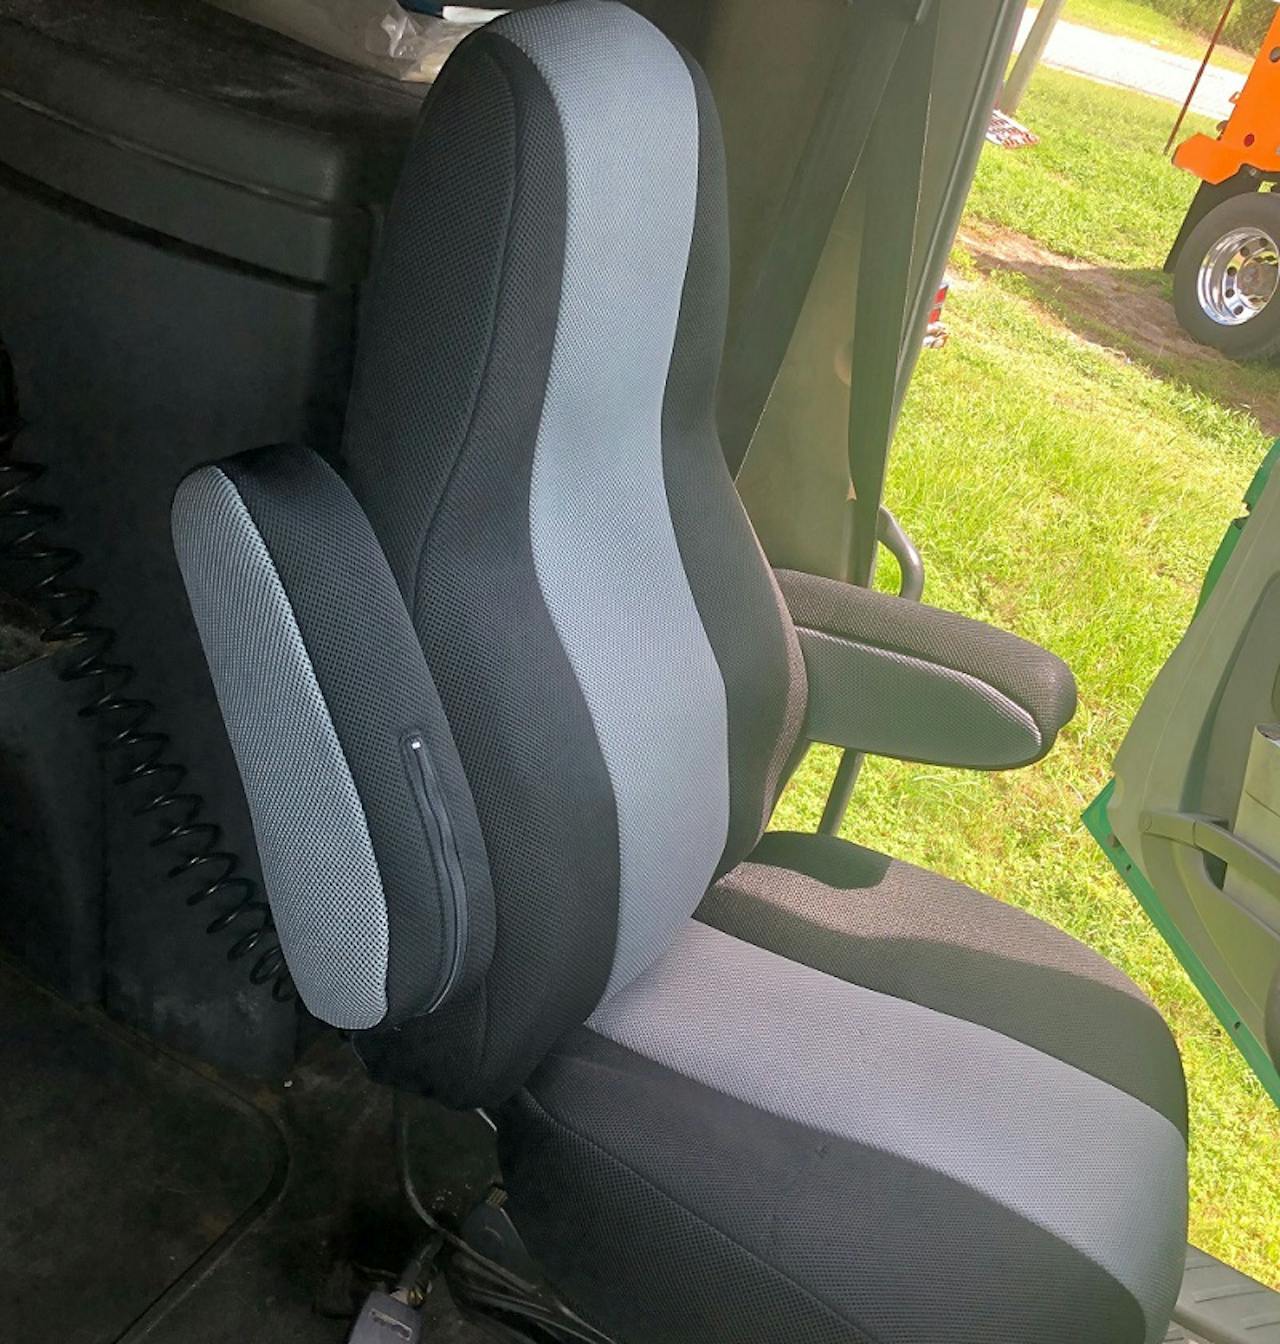 https://raneys-cdn11.imgix.net/images/stencil/original/products/203091/156991/Redline_Seat_Cover__63609.1643211355.jpg?auto=compress,format&w=1280